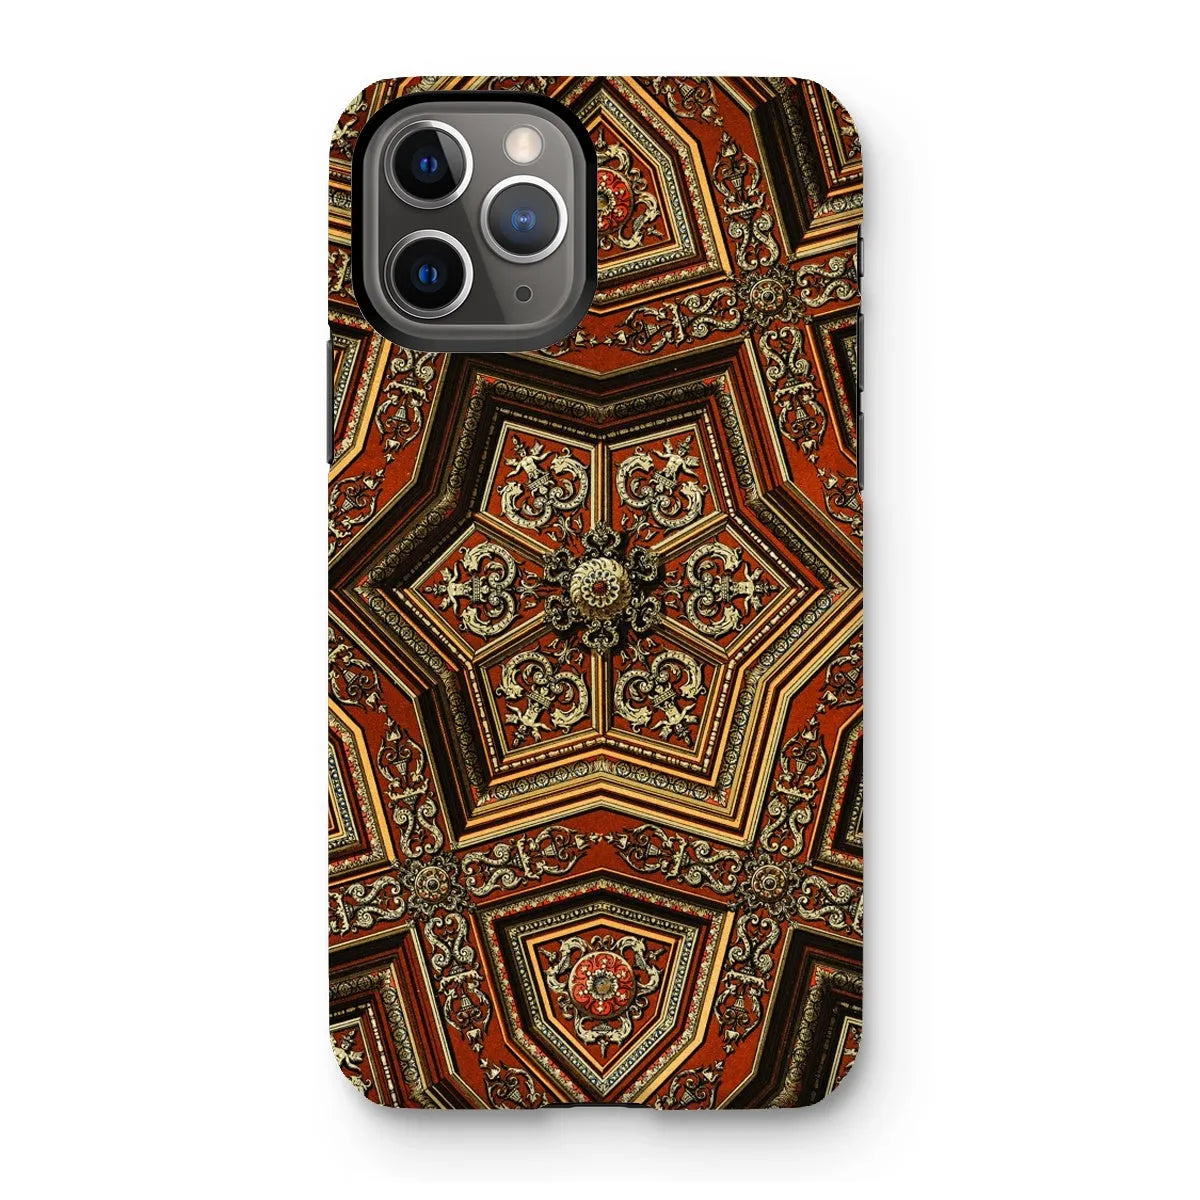 Renaissance Pattern By Auguste Racinet Tough Phone Case - Iphone 11 Pro / Gloss - Mobile Phone Cases - Aesthetic Art